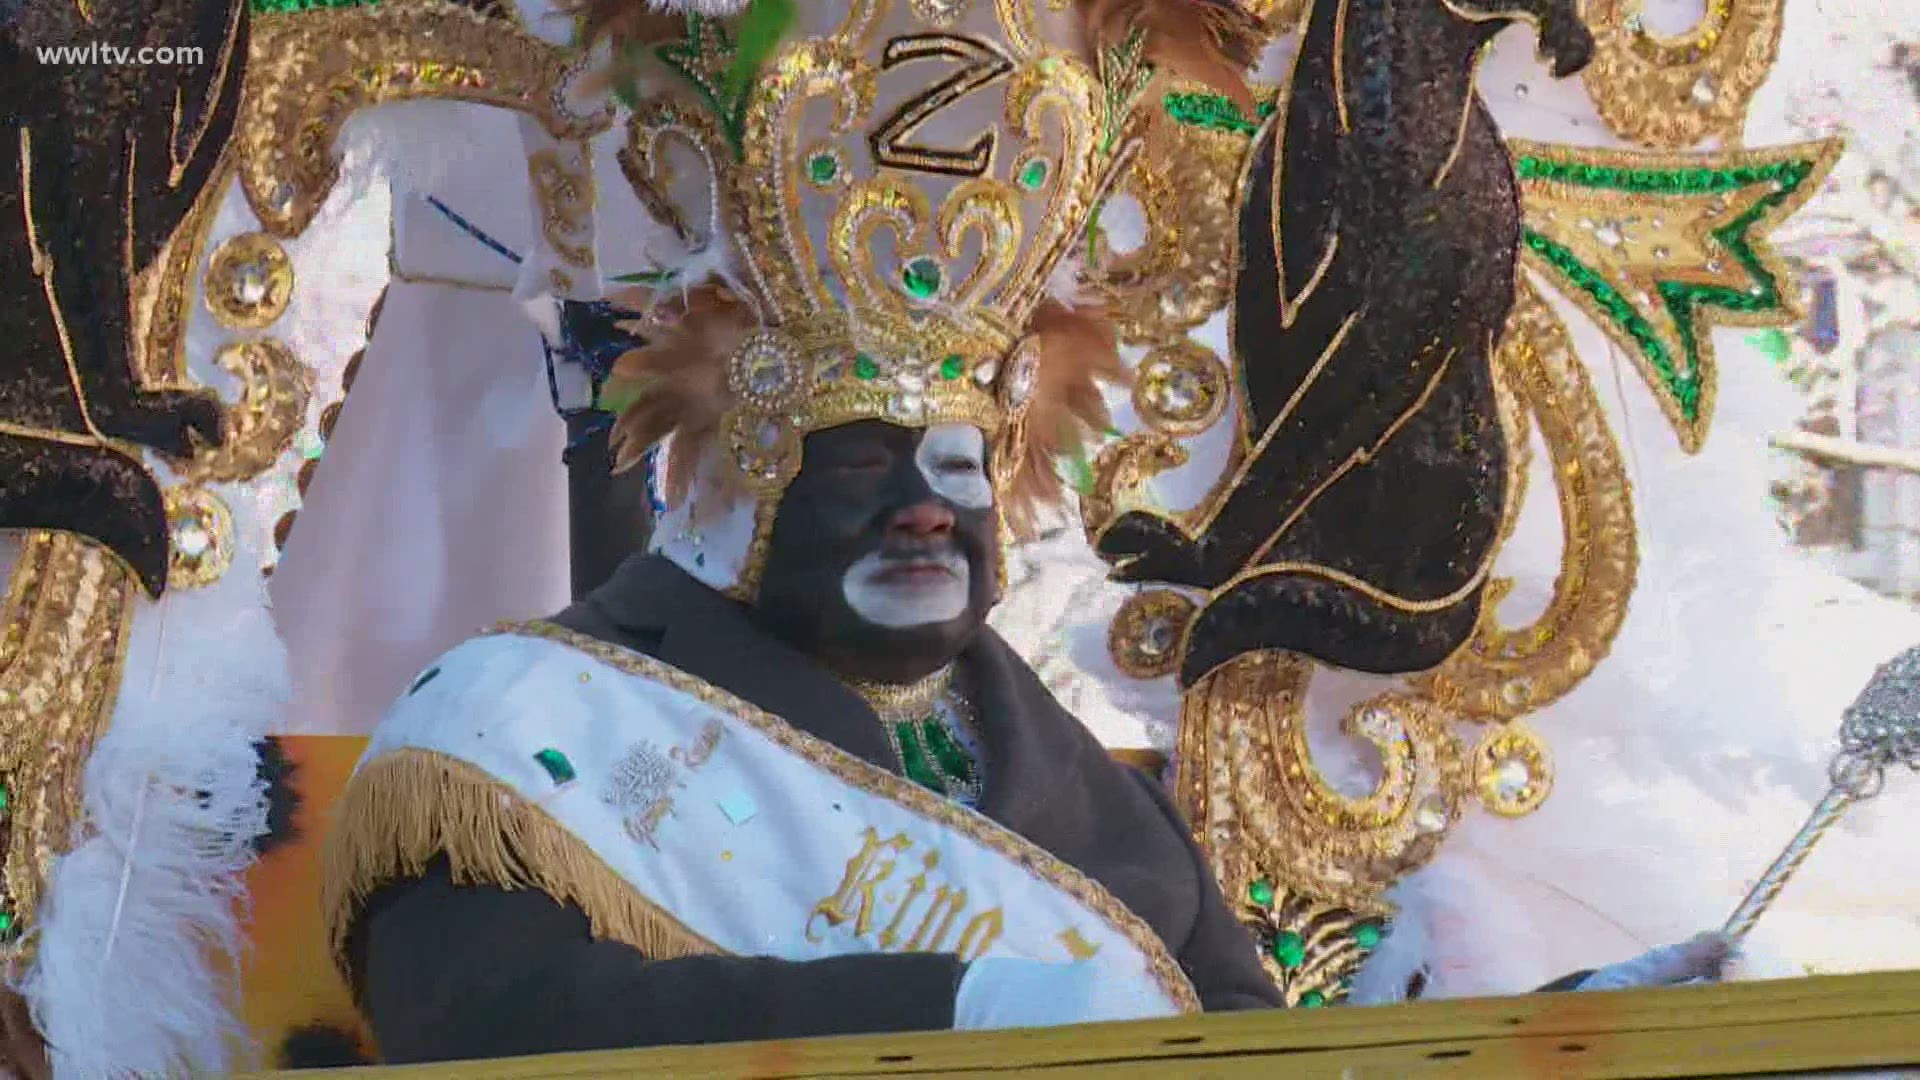 George Rainey, who became the oldest king of the Zulu Social Aid and Pleasure Club when he reigned over the krewe’s 2019 Mardi Gras parade, has died.